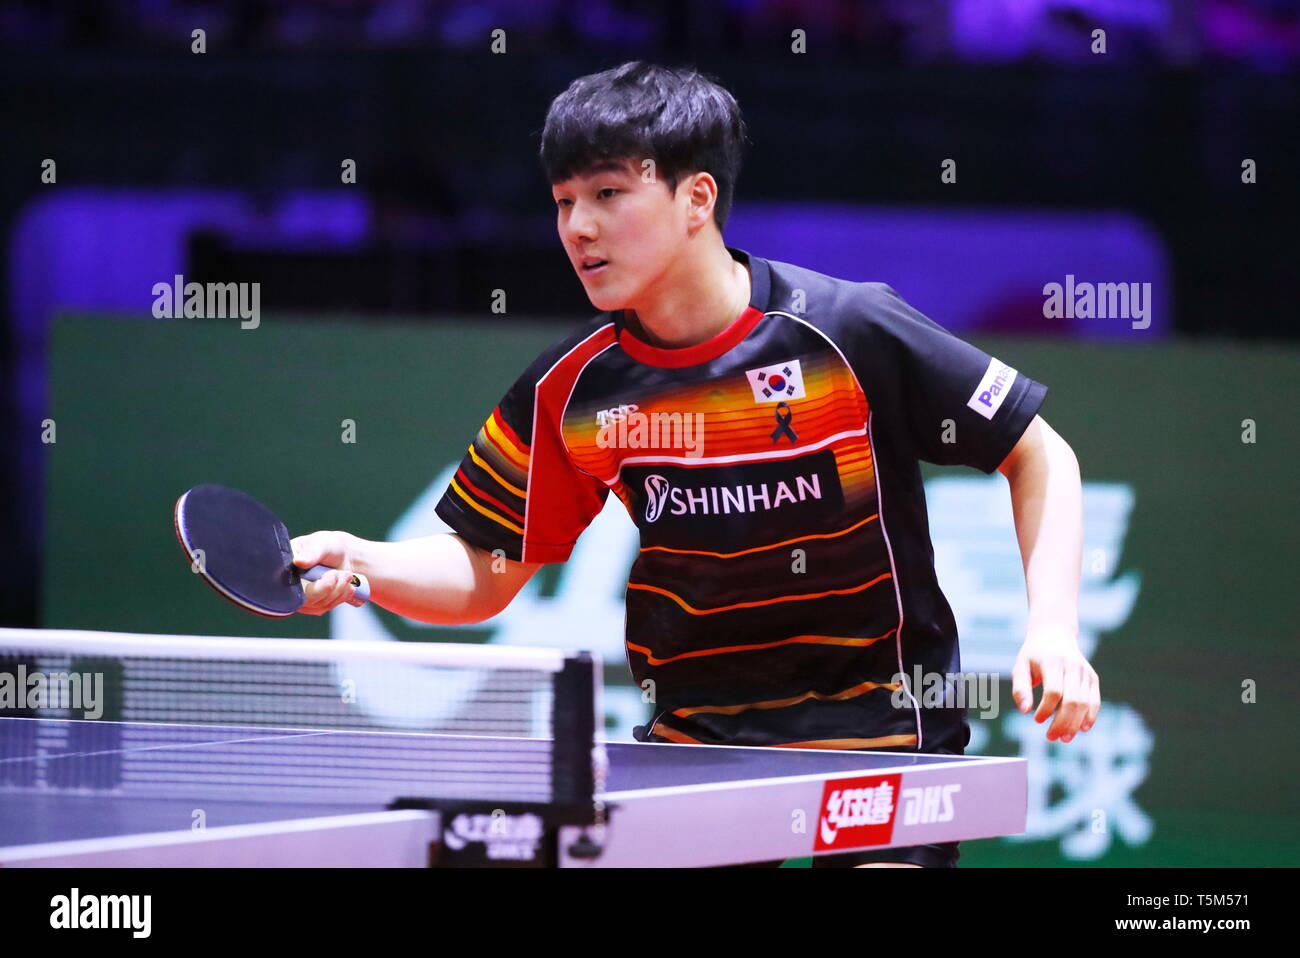 HUNGEXPO Budapest Fair Center, Budapest, Hungary. 25th Apr, 2019. An  Jaehyun (KOR), APRIL 25, 2019 - Table Tennis : 2019 World Table Tennis  Championships Men's singles 16 Round match at HUNGEXPO Budapest